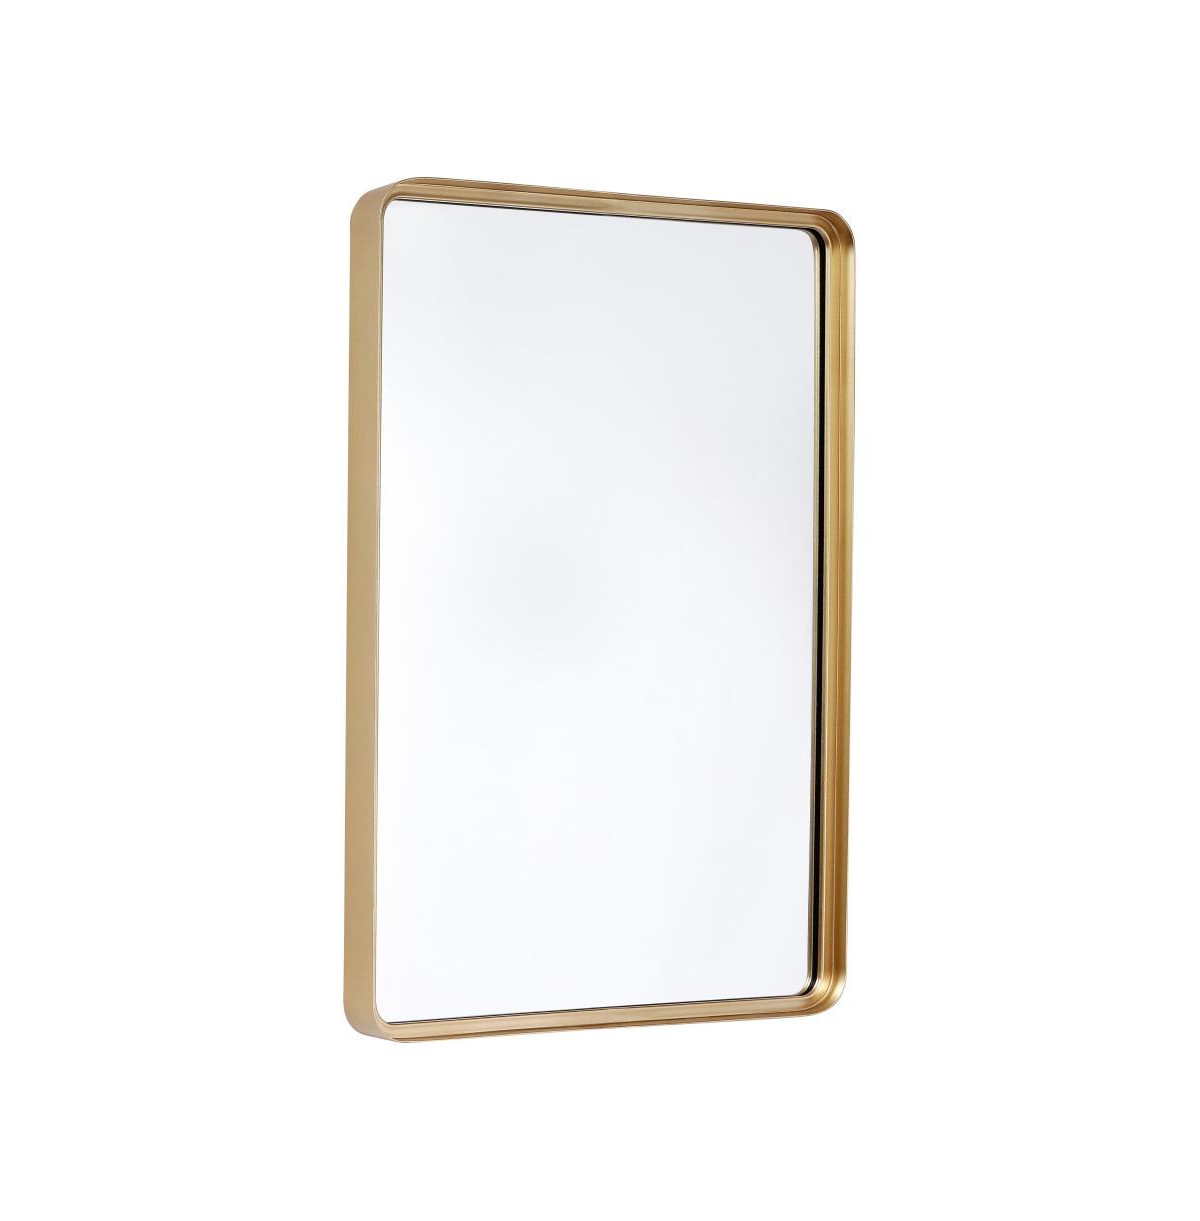 Halstead Decorative Wall Mirror With Rounded Corners For Bathroom, Living Room, Entryway, Hangs Horizontal Or Vertical - Gold